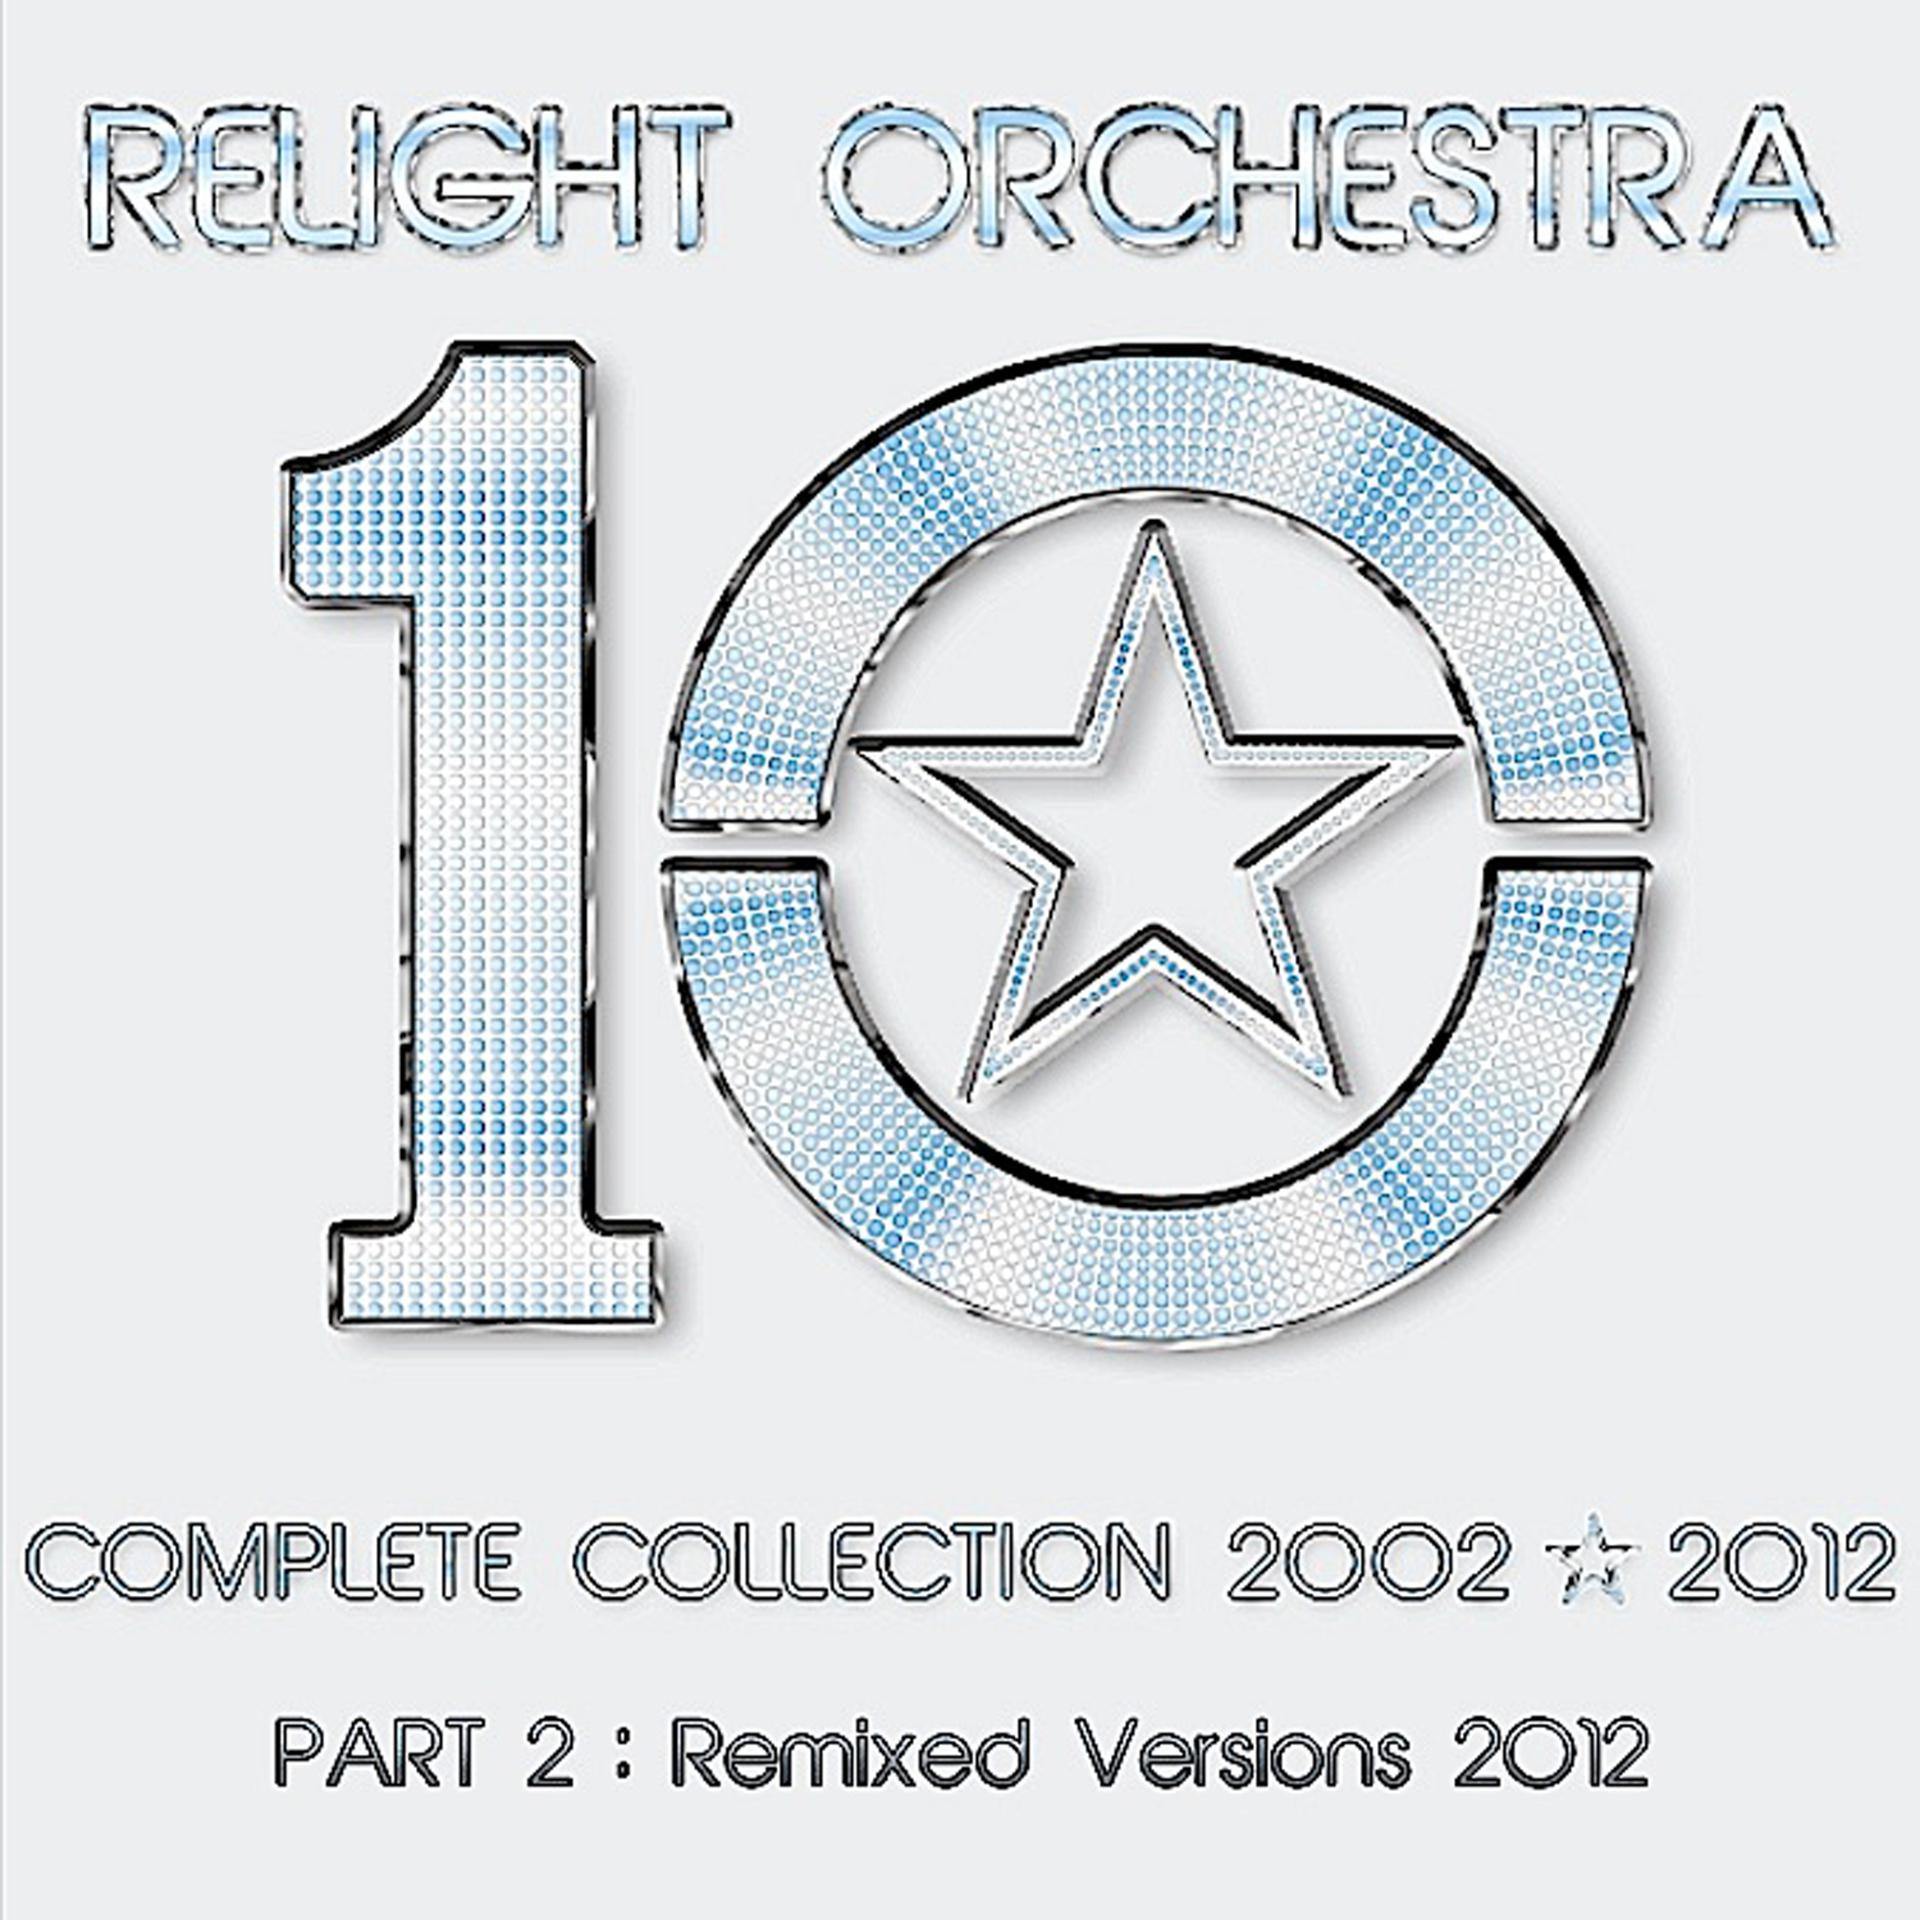 Постер альбома "10" The Complete Collection 2002-2012 (Part 2: Remixed Version 2012)